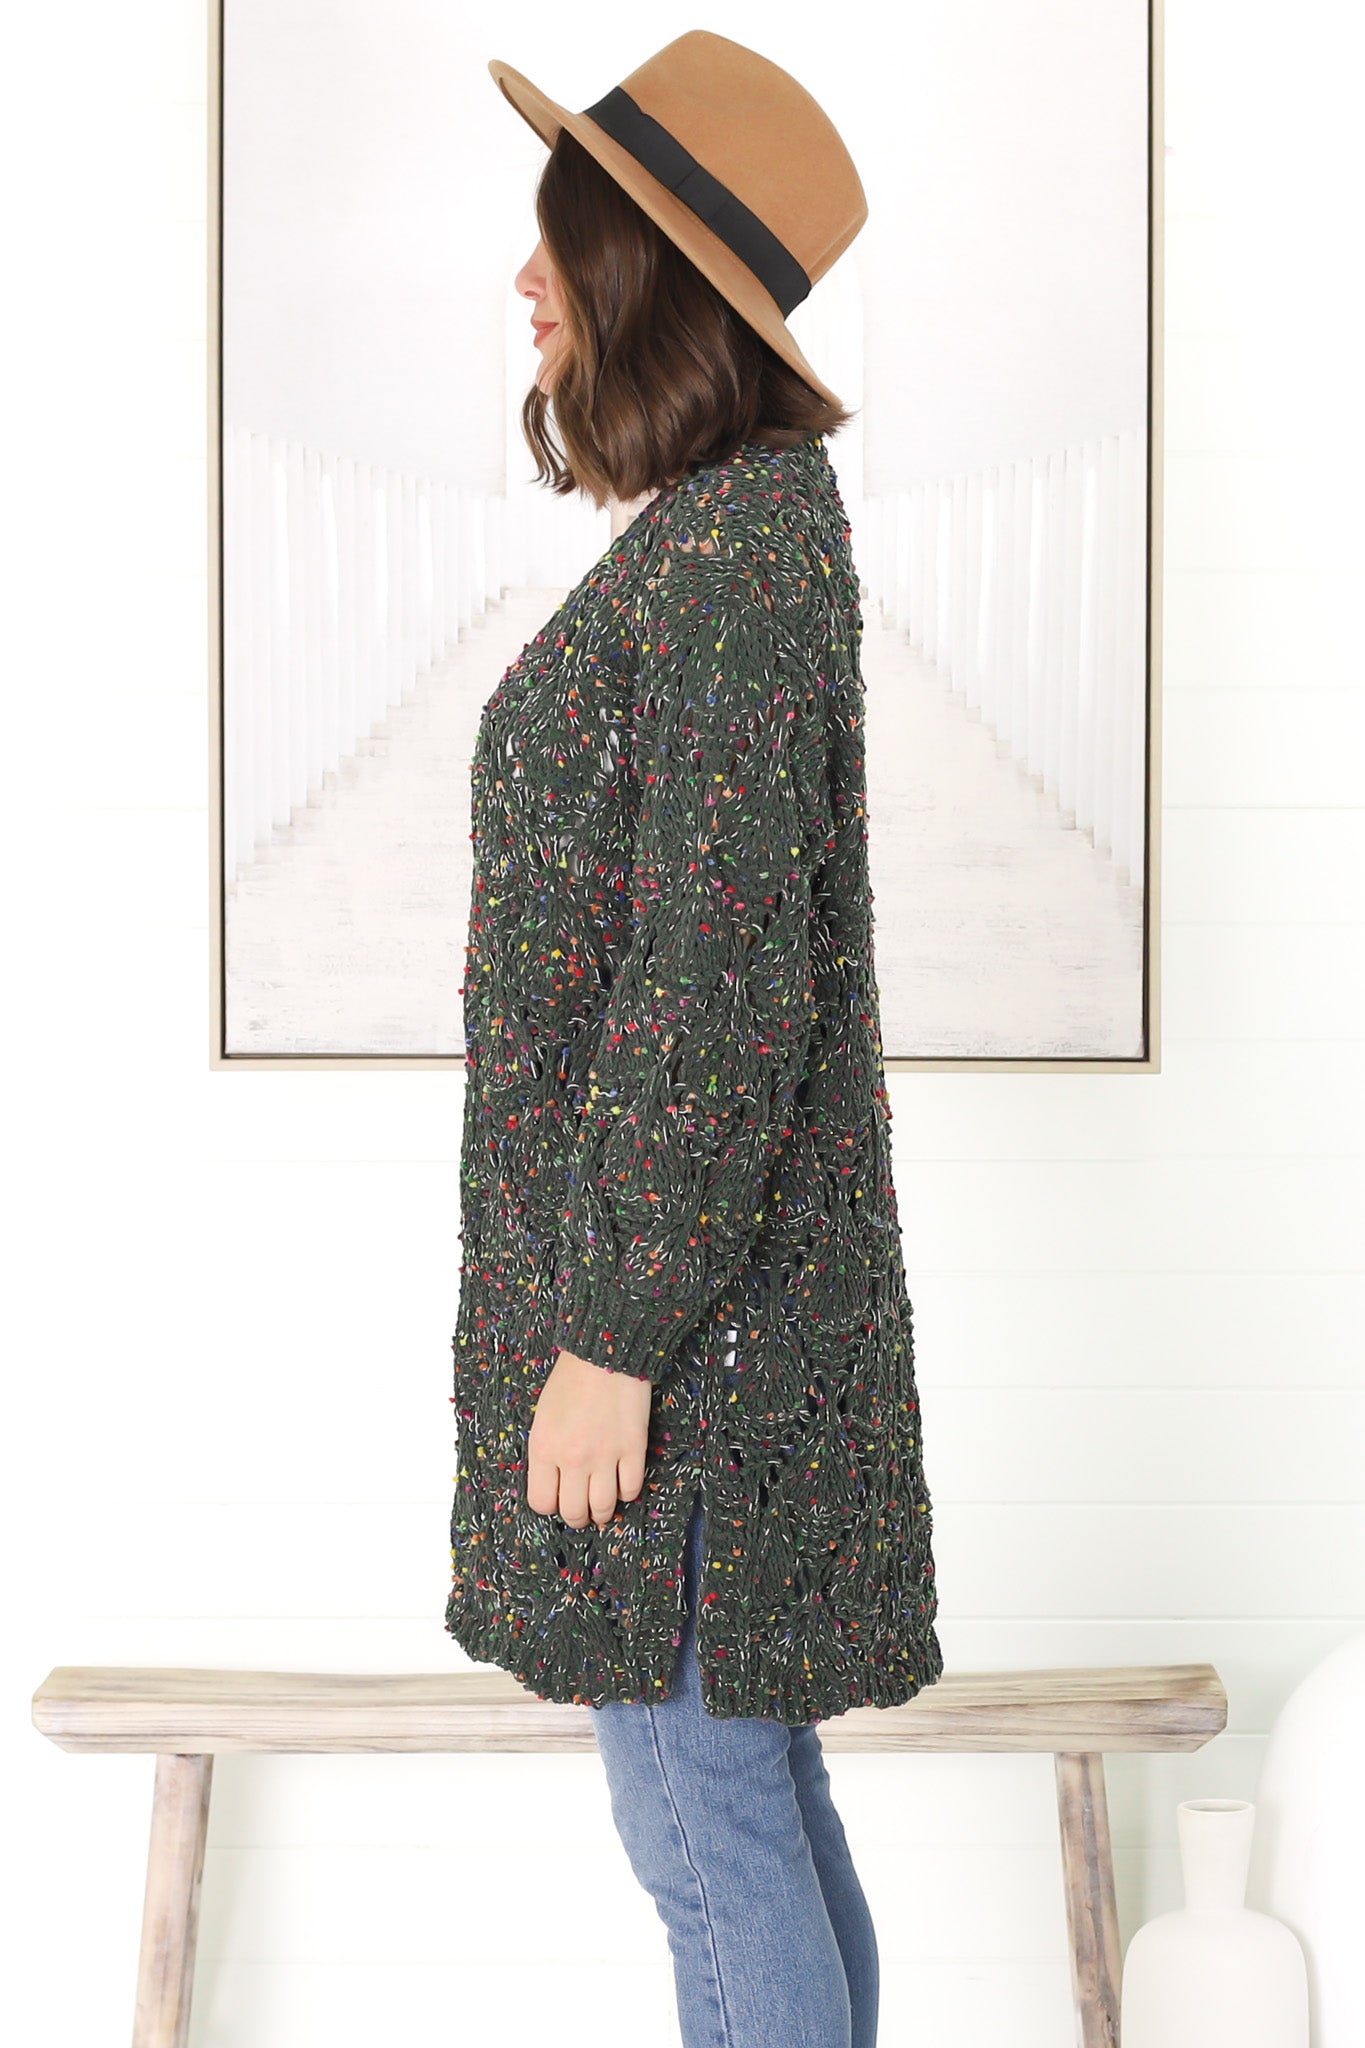 Honour Cardigan - Rainbow Speck Open Knit Cardigan in Military Green